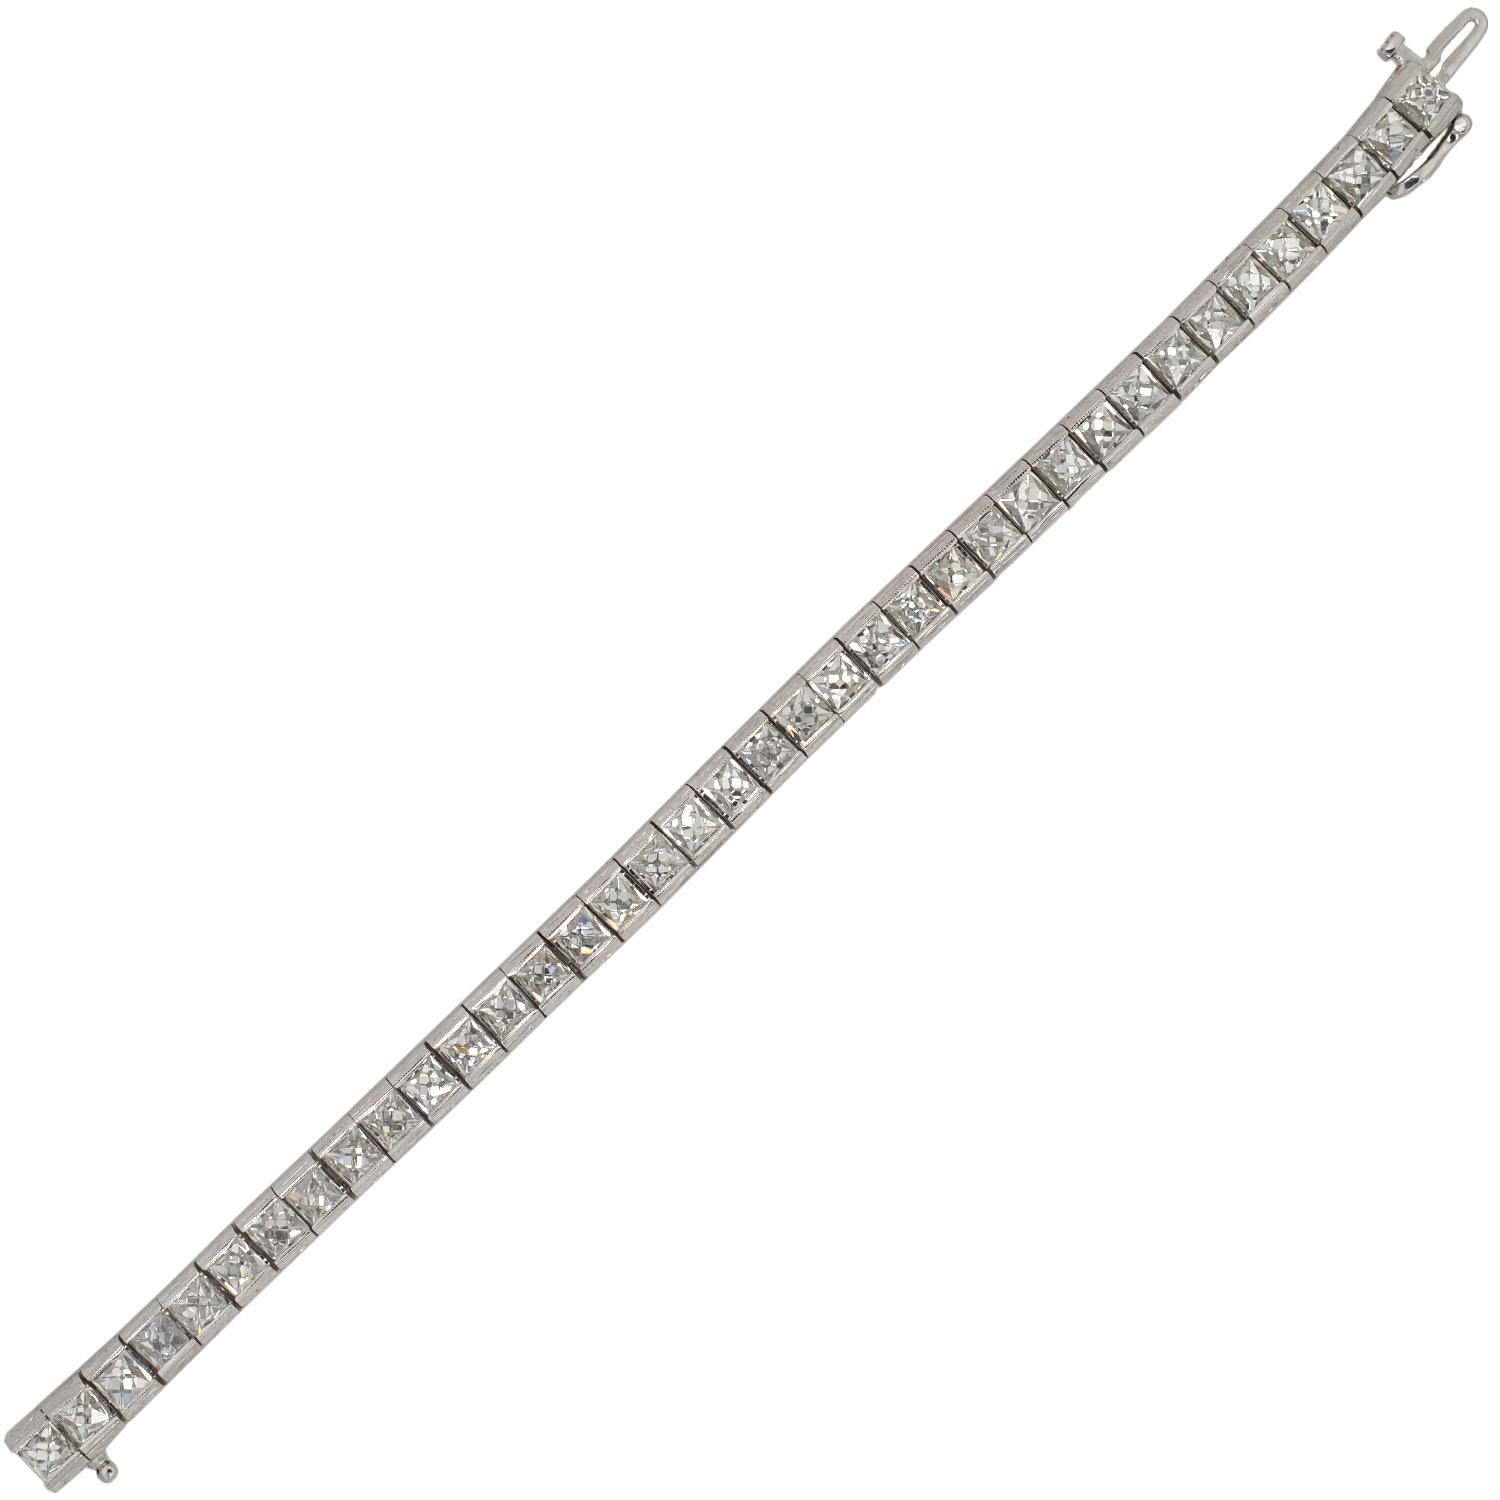 An absolutely exquisite Art Deco style diamond line bracelet! This stunning platinum piece features a row of 38 French Cut diamonds, which carry seamlessly around the wrist to create a stunning and flexible design. The sparkling stones exhibit E-F